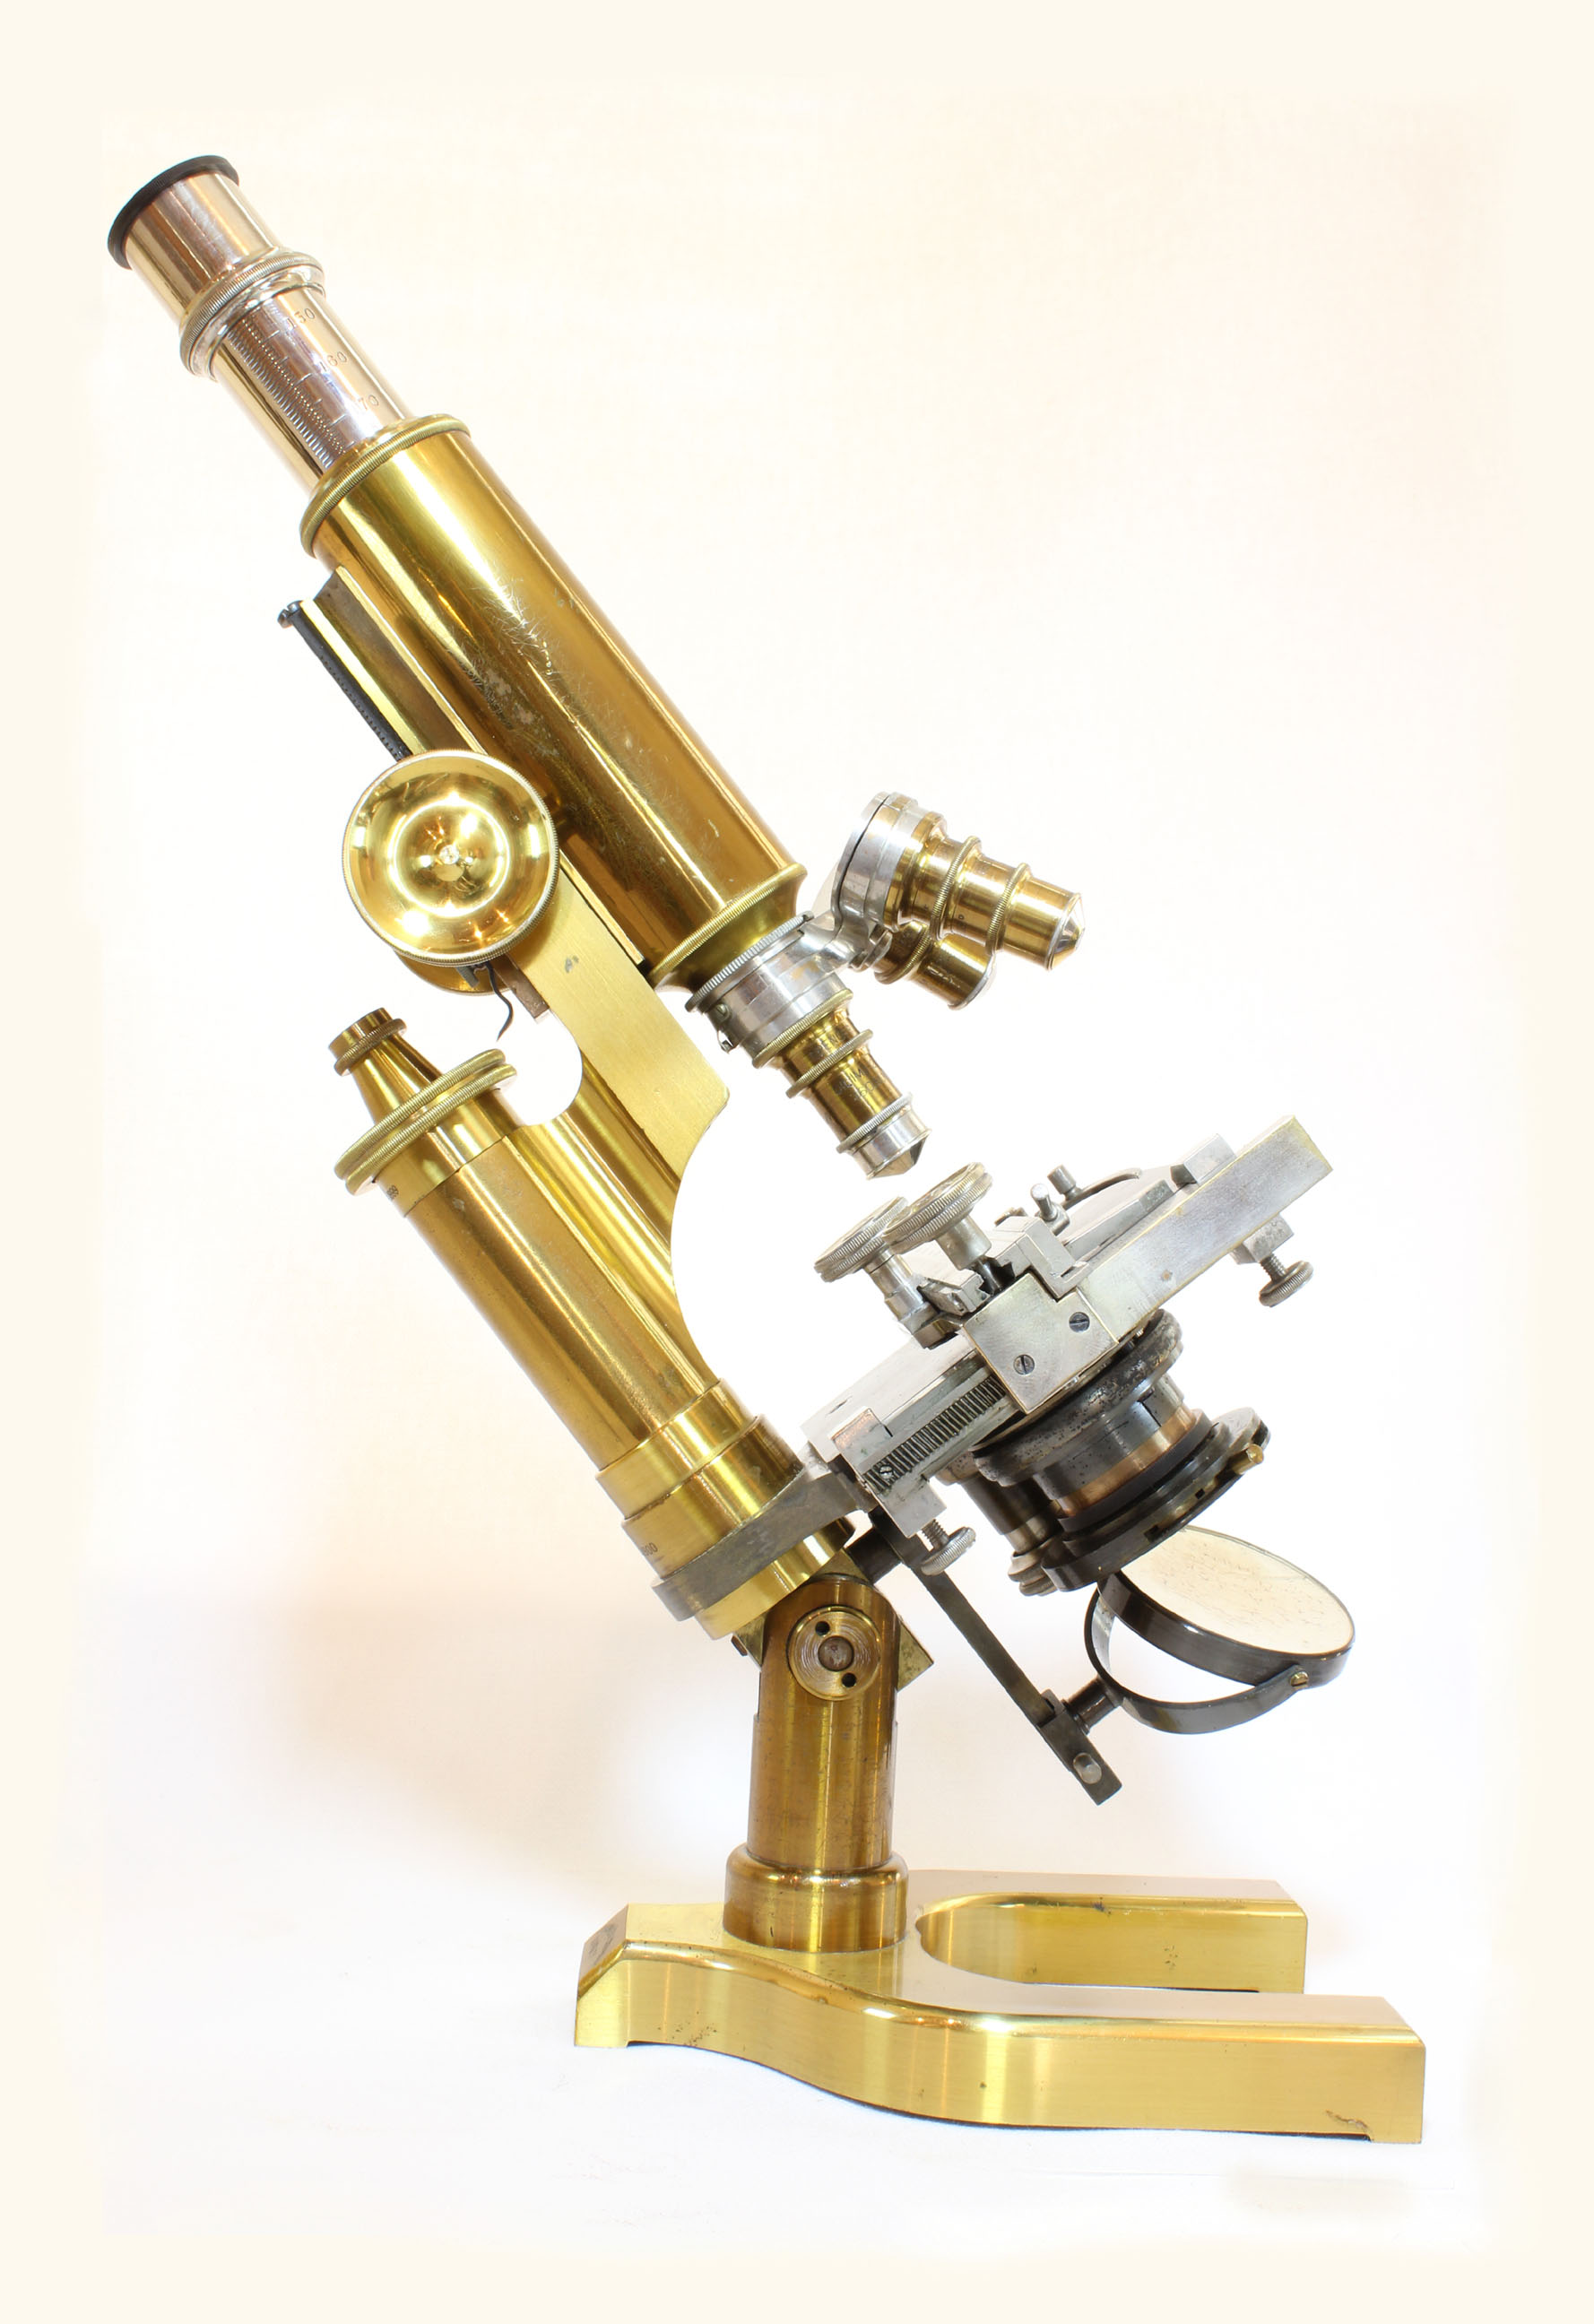 Spencer Number 1 First Class Microscope